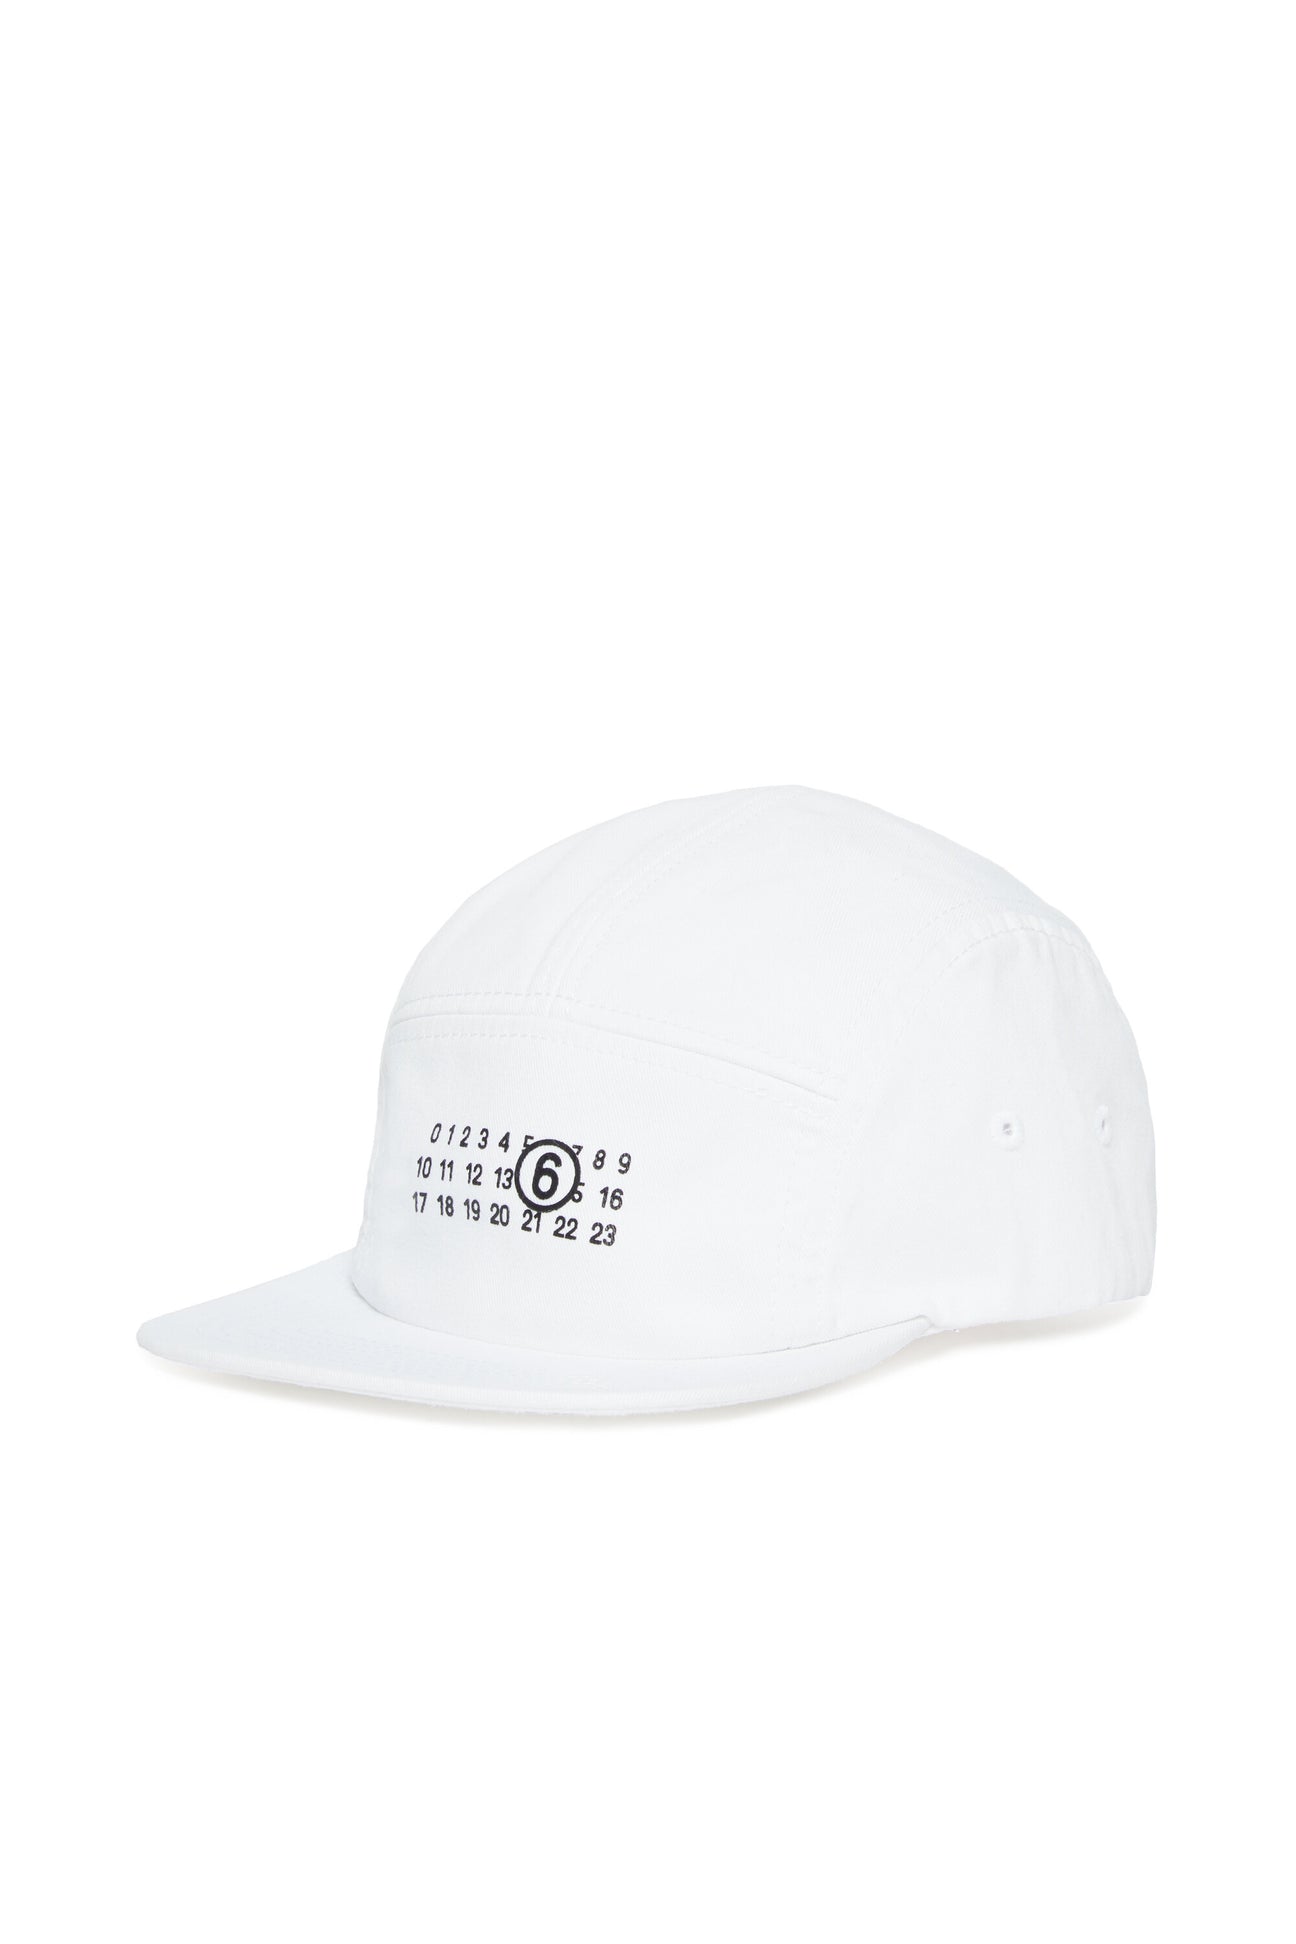 Five-panel hat branded with numeric logo Five-panel hat branded with numeric logo